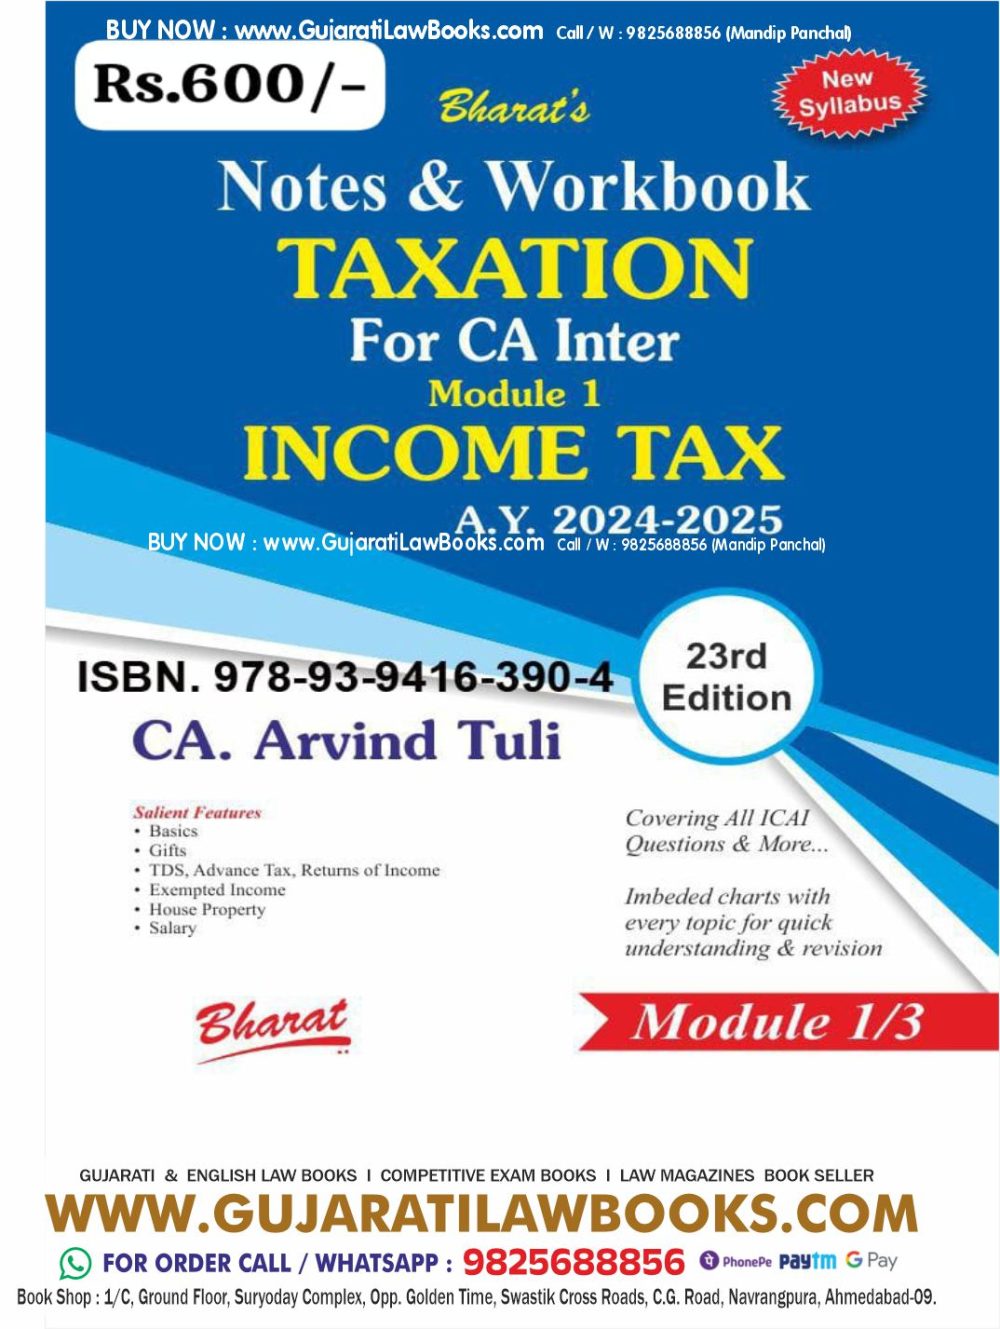 Notes and Workbook TAXATION for CA Inter Module 1 INCOME TA A Y 2024-2025 by CA Arvind Tuli Latest 23rd Edition Bharat